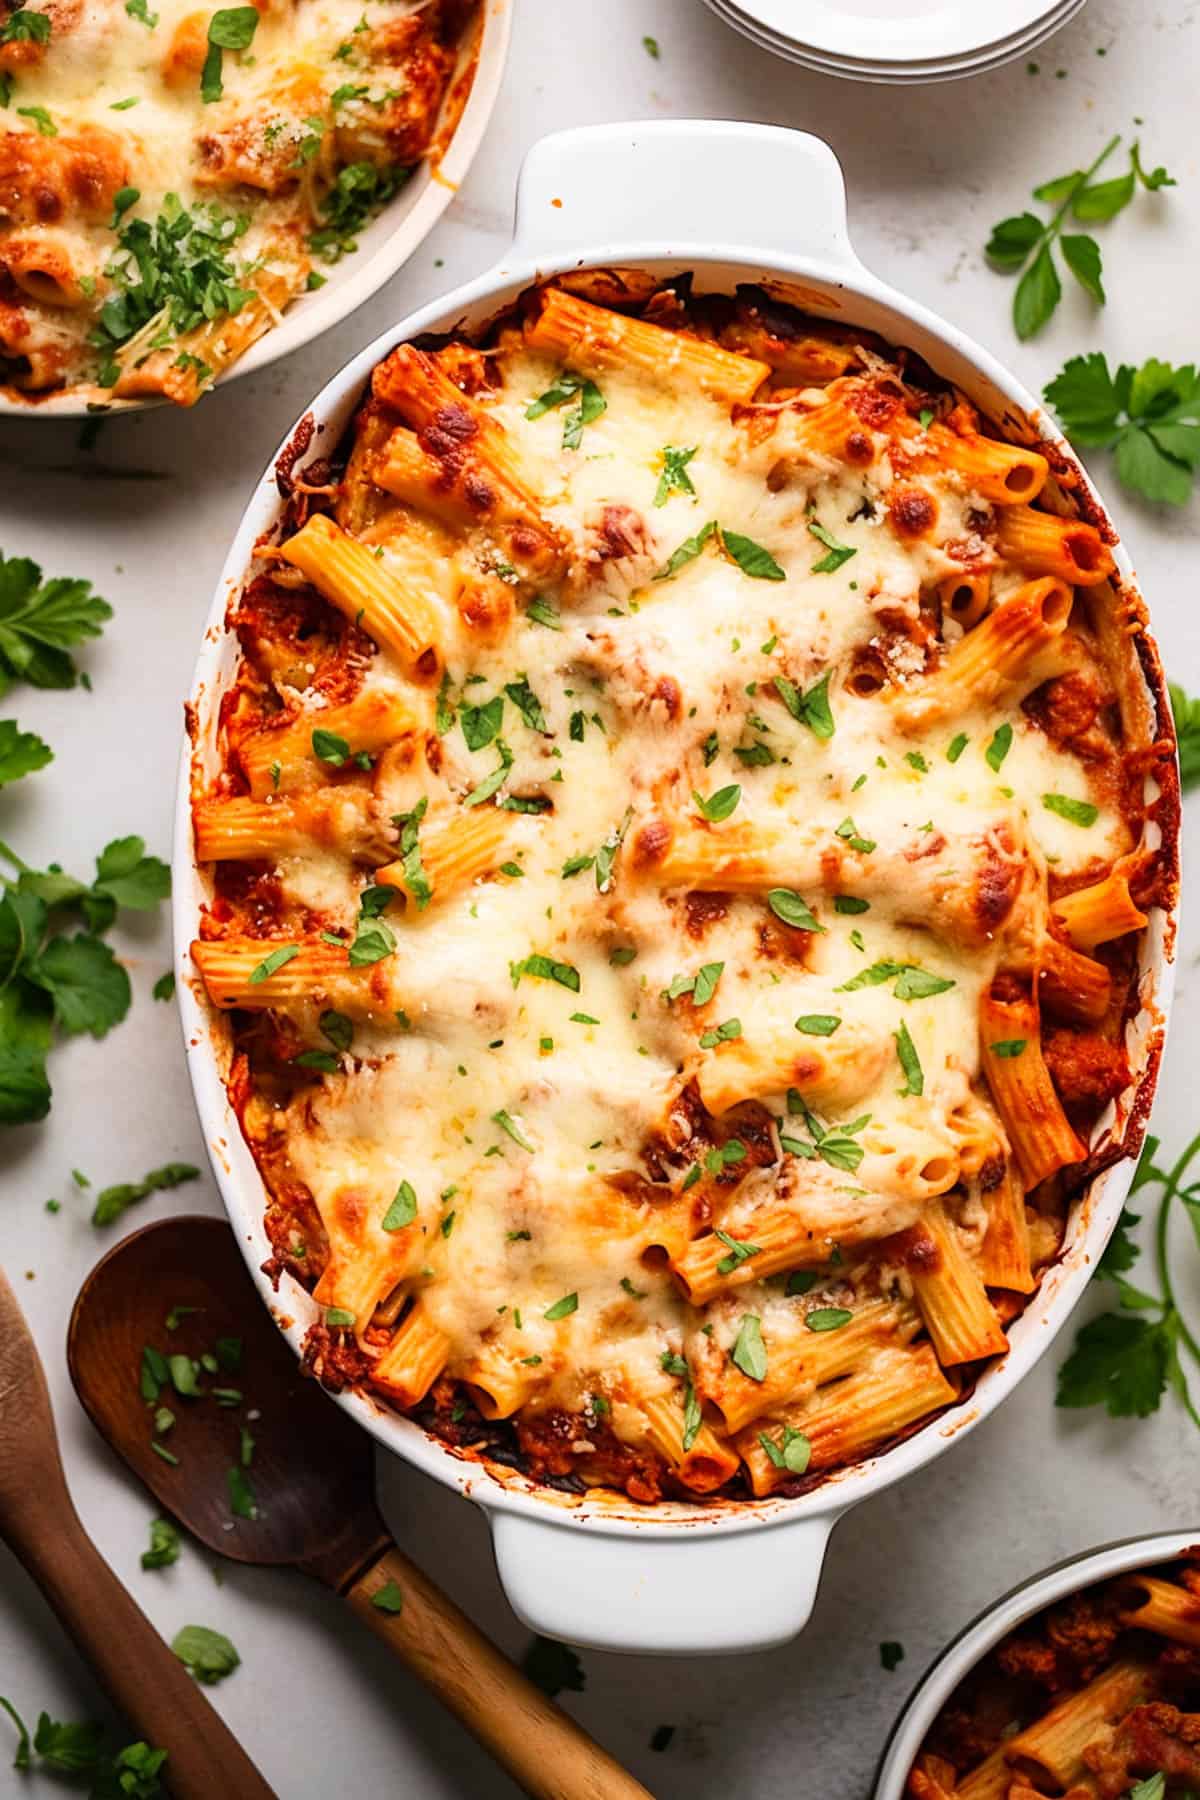 Chicken pasta bake with cheese and parsley in a white dish.